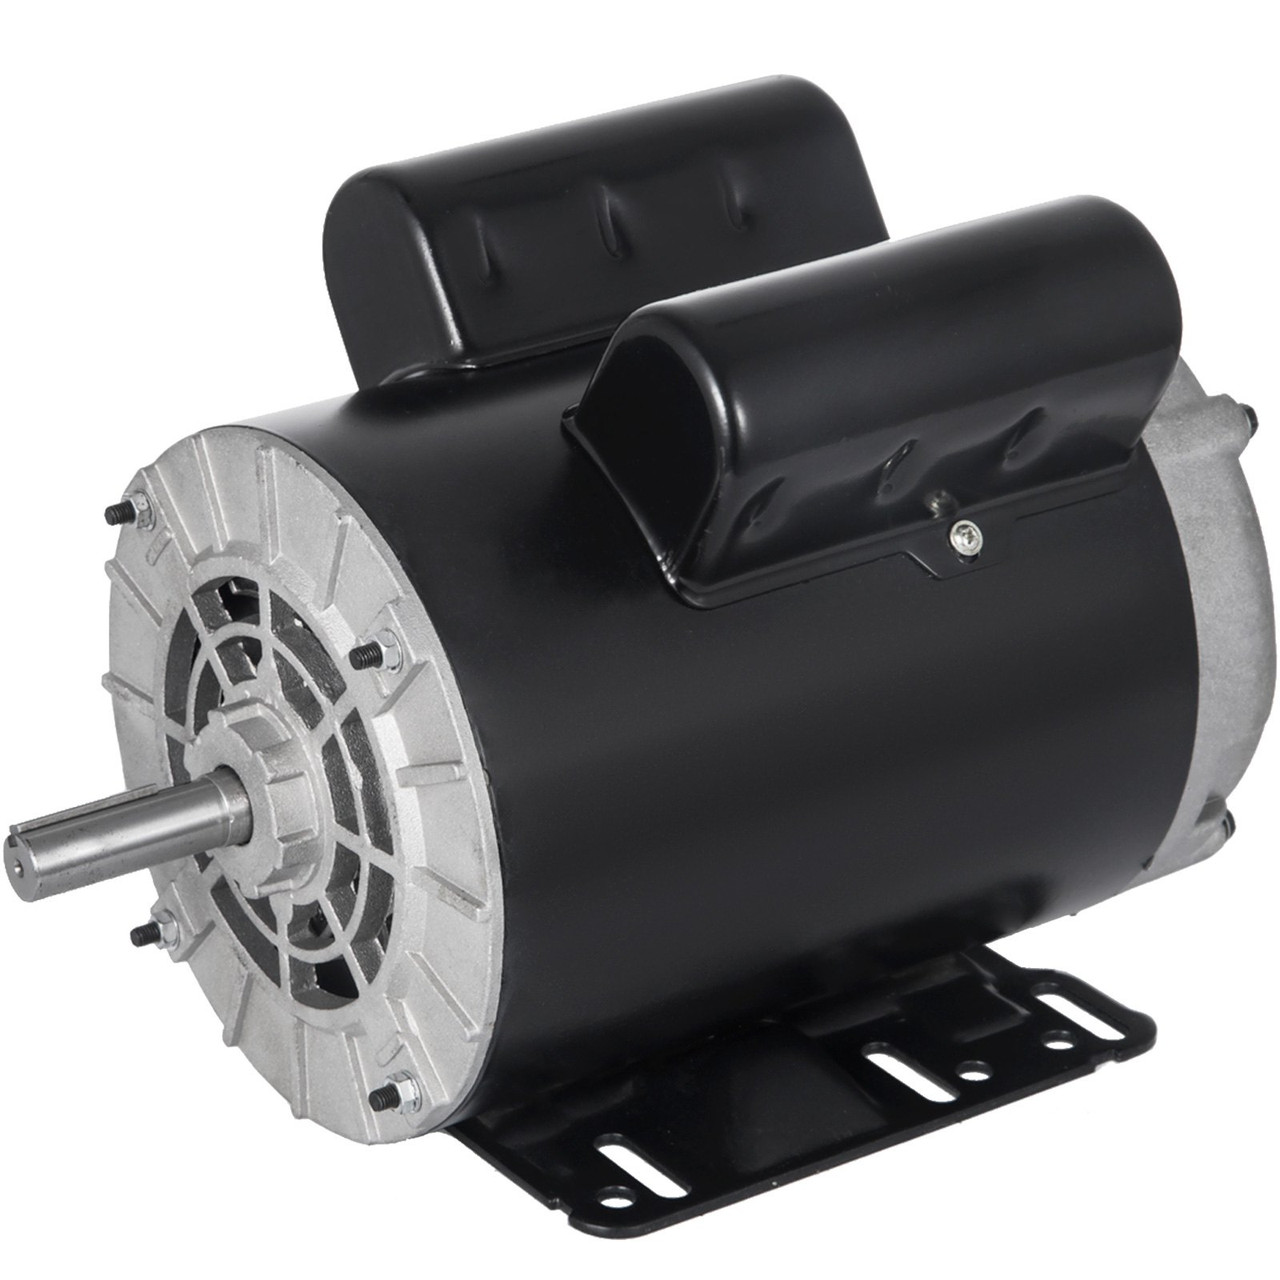 New 2.2 KW HP Air Compressor Electric Motor Single Phase 56 Frame 3450 RPM